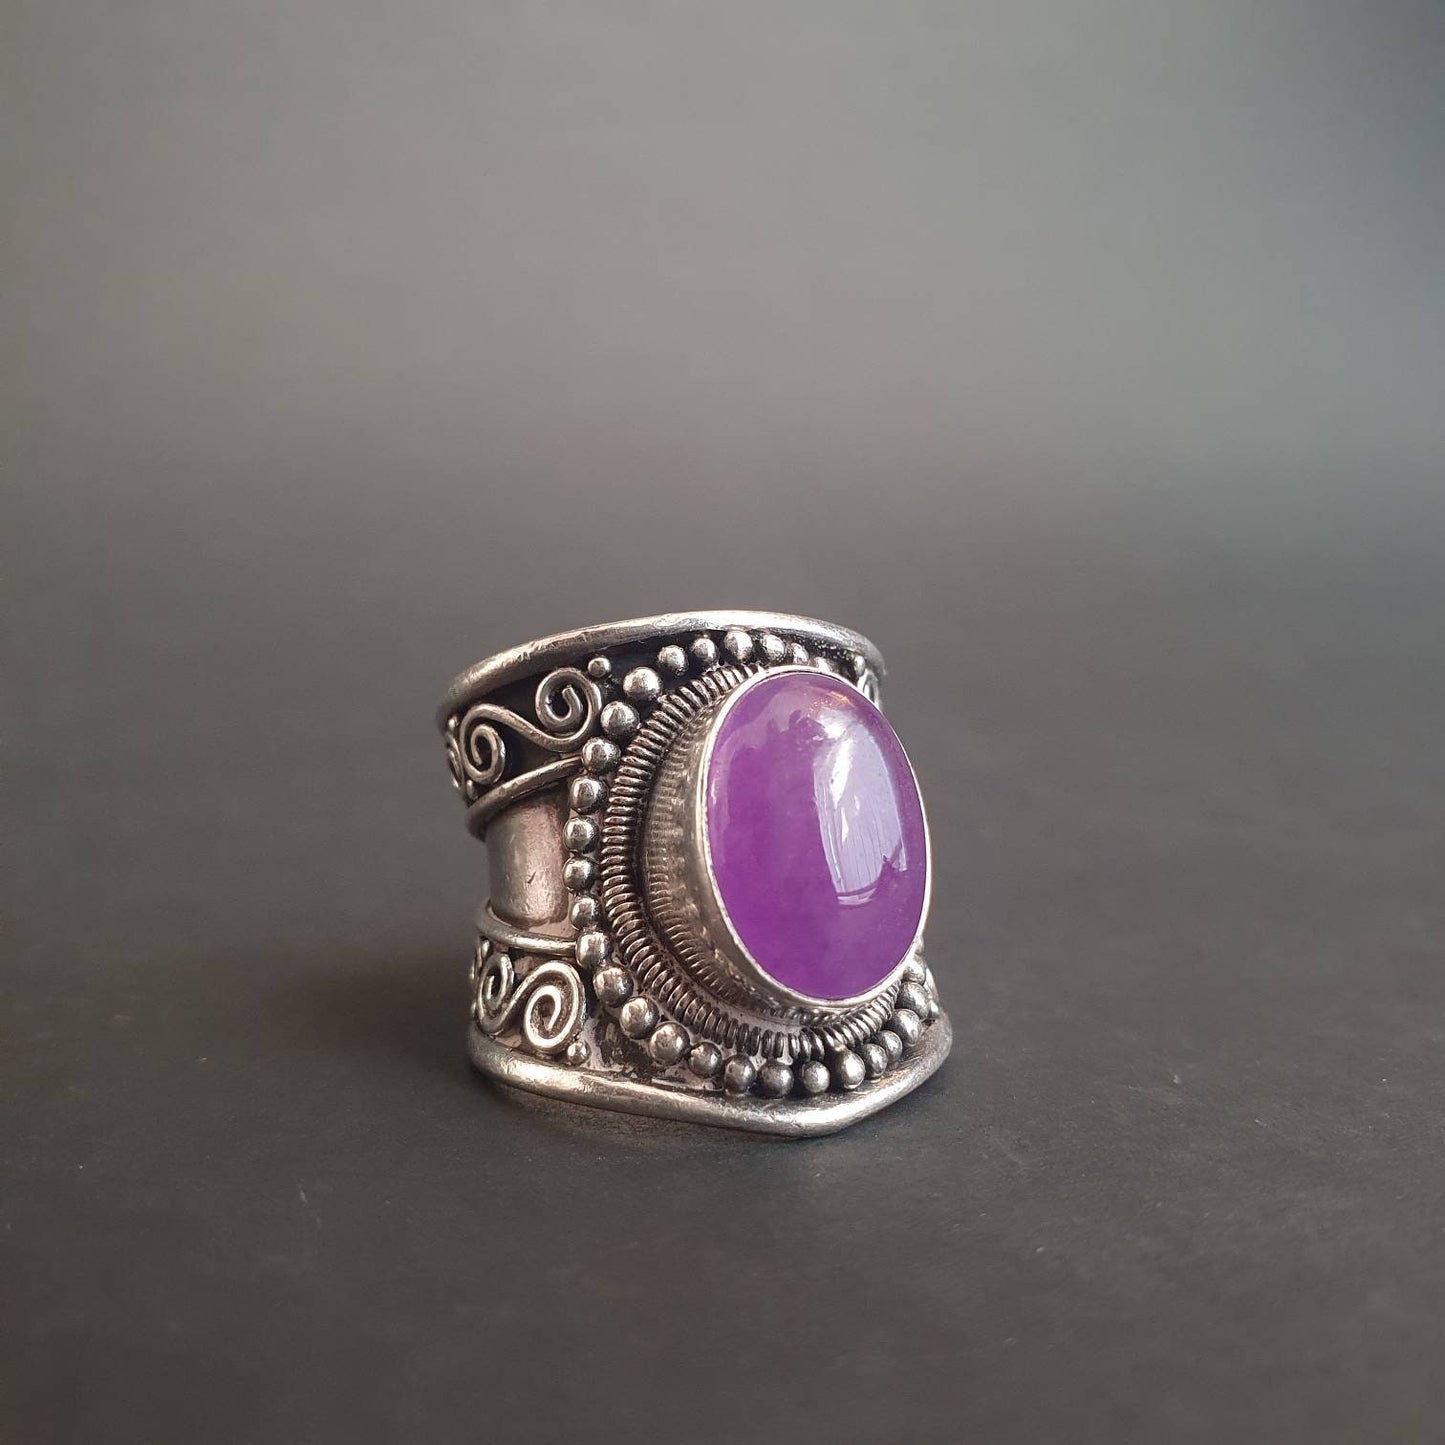 Statement ring, sterling silver ring,suarti ring, bohemian jewelry, amethyst ring, chunky ring, ethnic, tribal,952, gift's, occasions,unisex